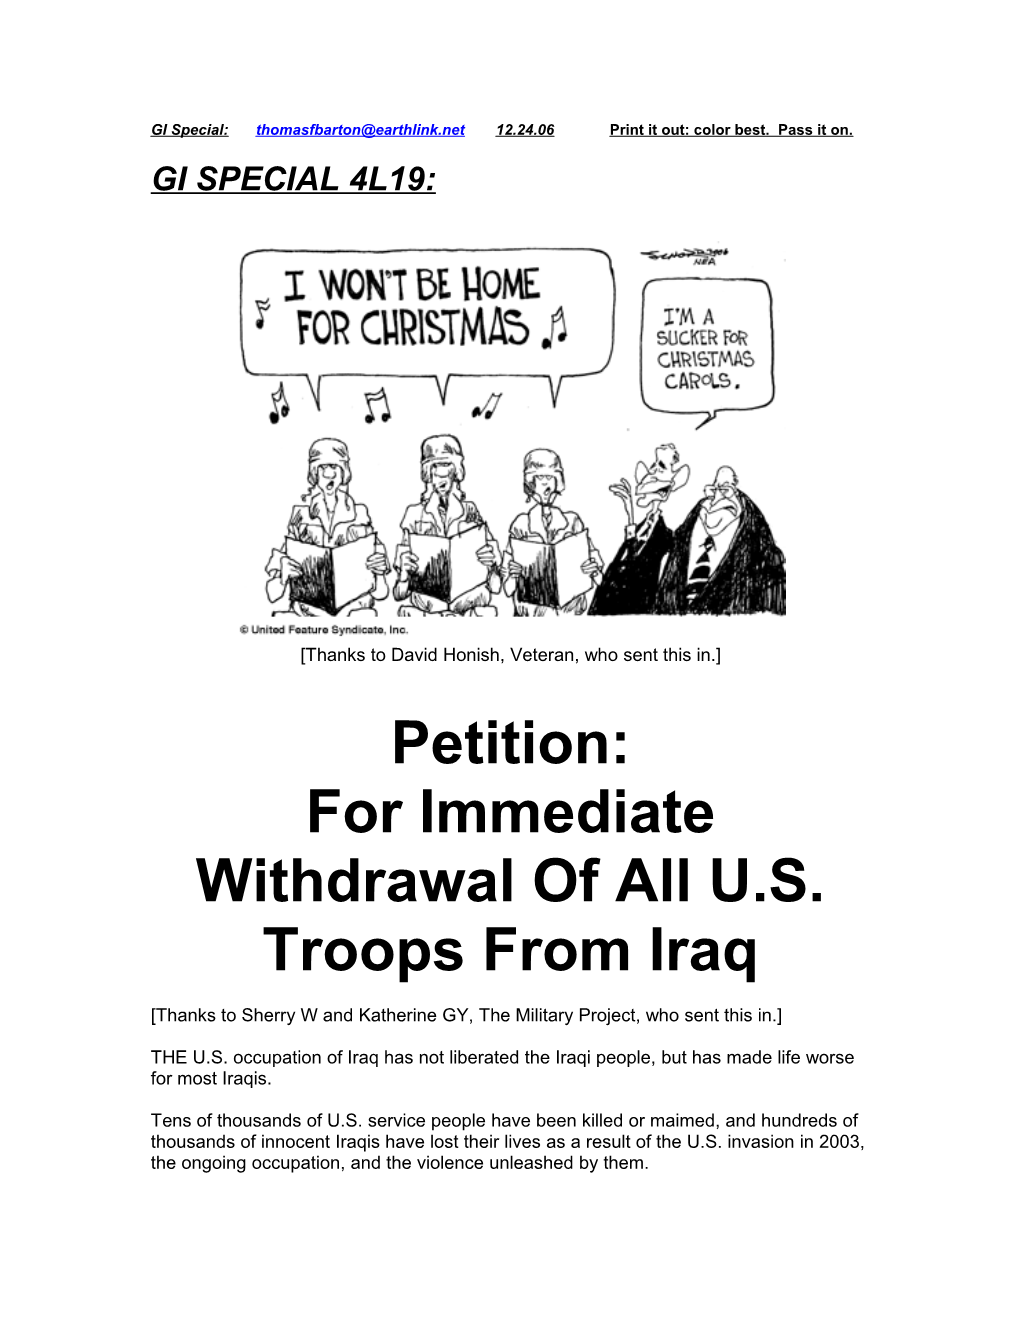 For Immediate Withdrawal of All U.S. Troops from Iraq